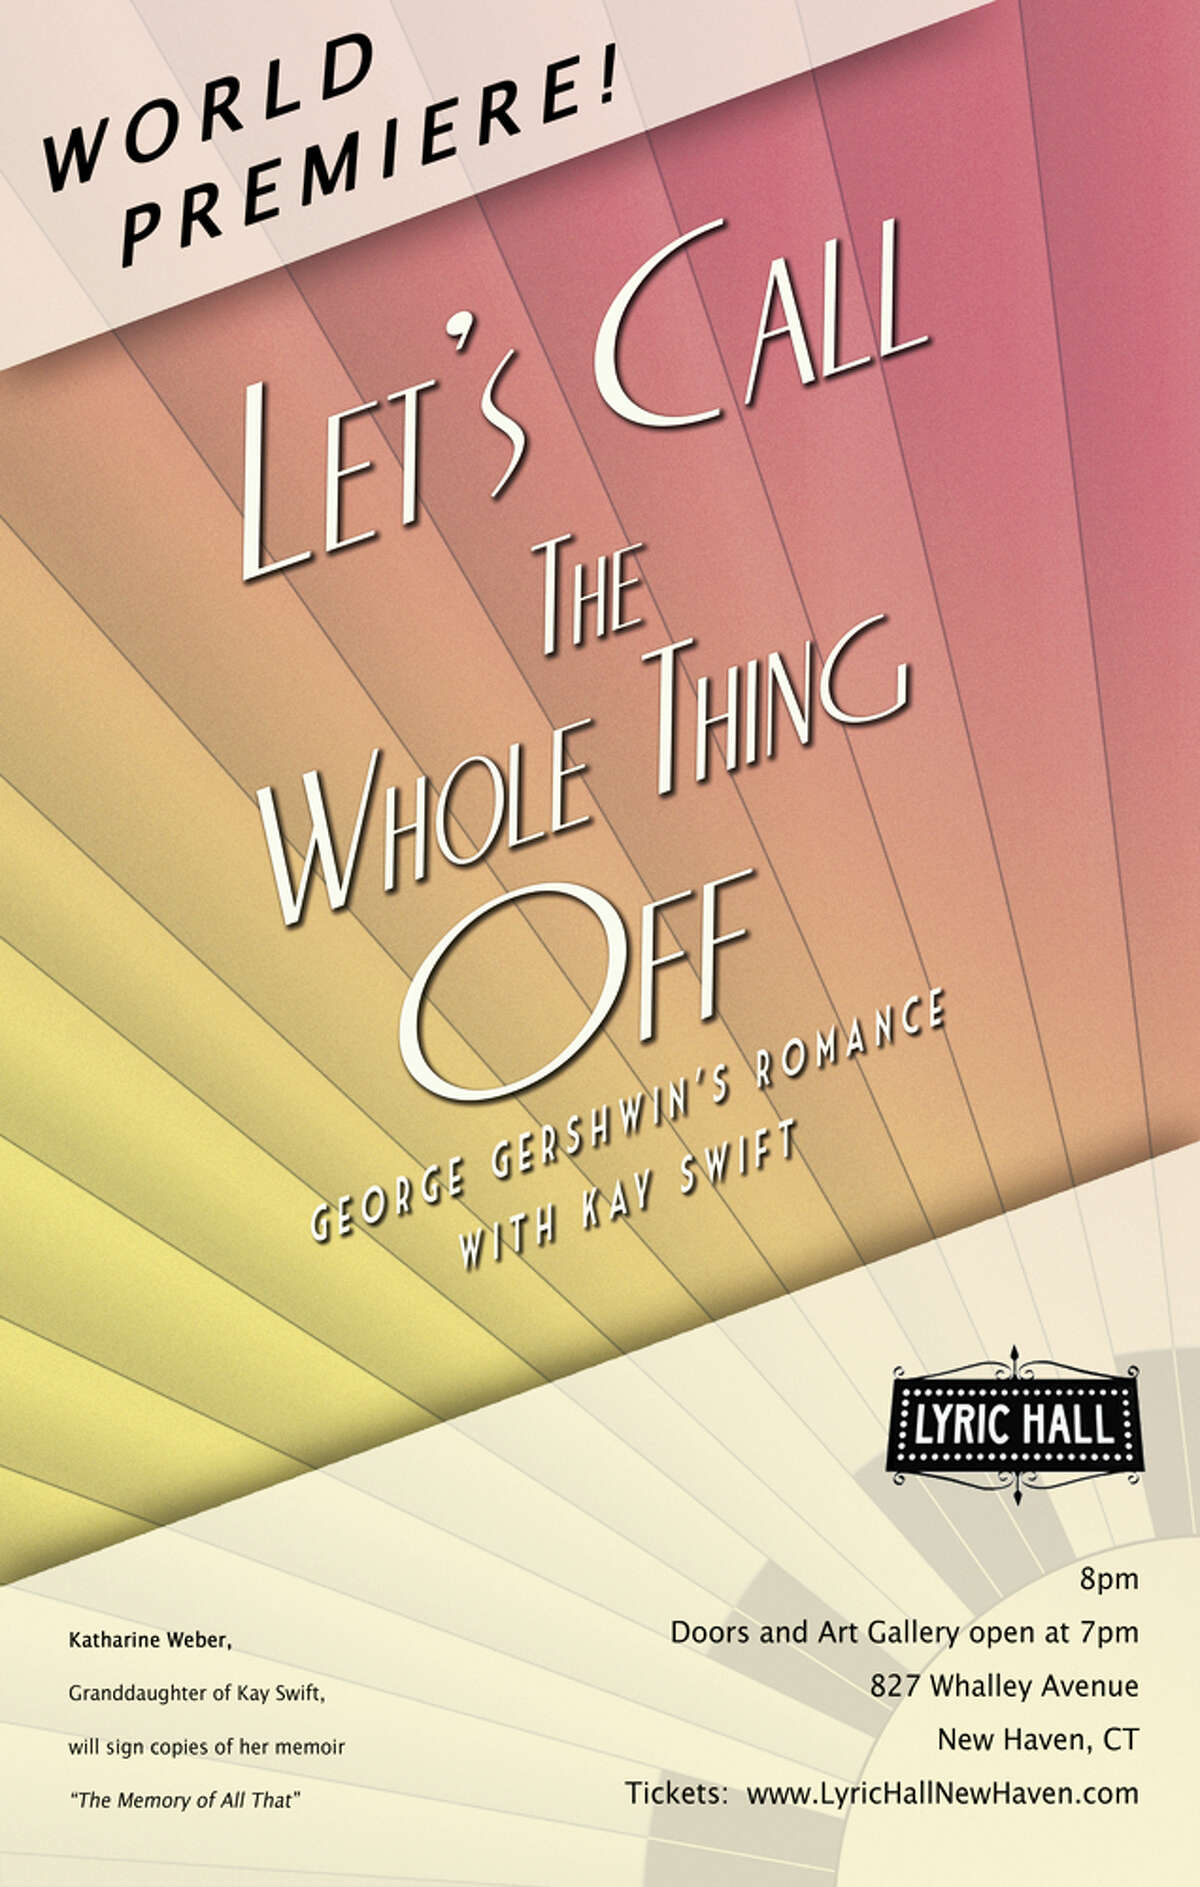 The world premiere of “Let’s Call the Whole Thing Off: George Gershwin’s Romance with Kay Swift” will be staged Feb. 12 at 8 p.m. at Lyric Hall, 827 Whalley Ave. in New Haven.